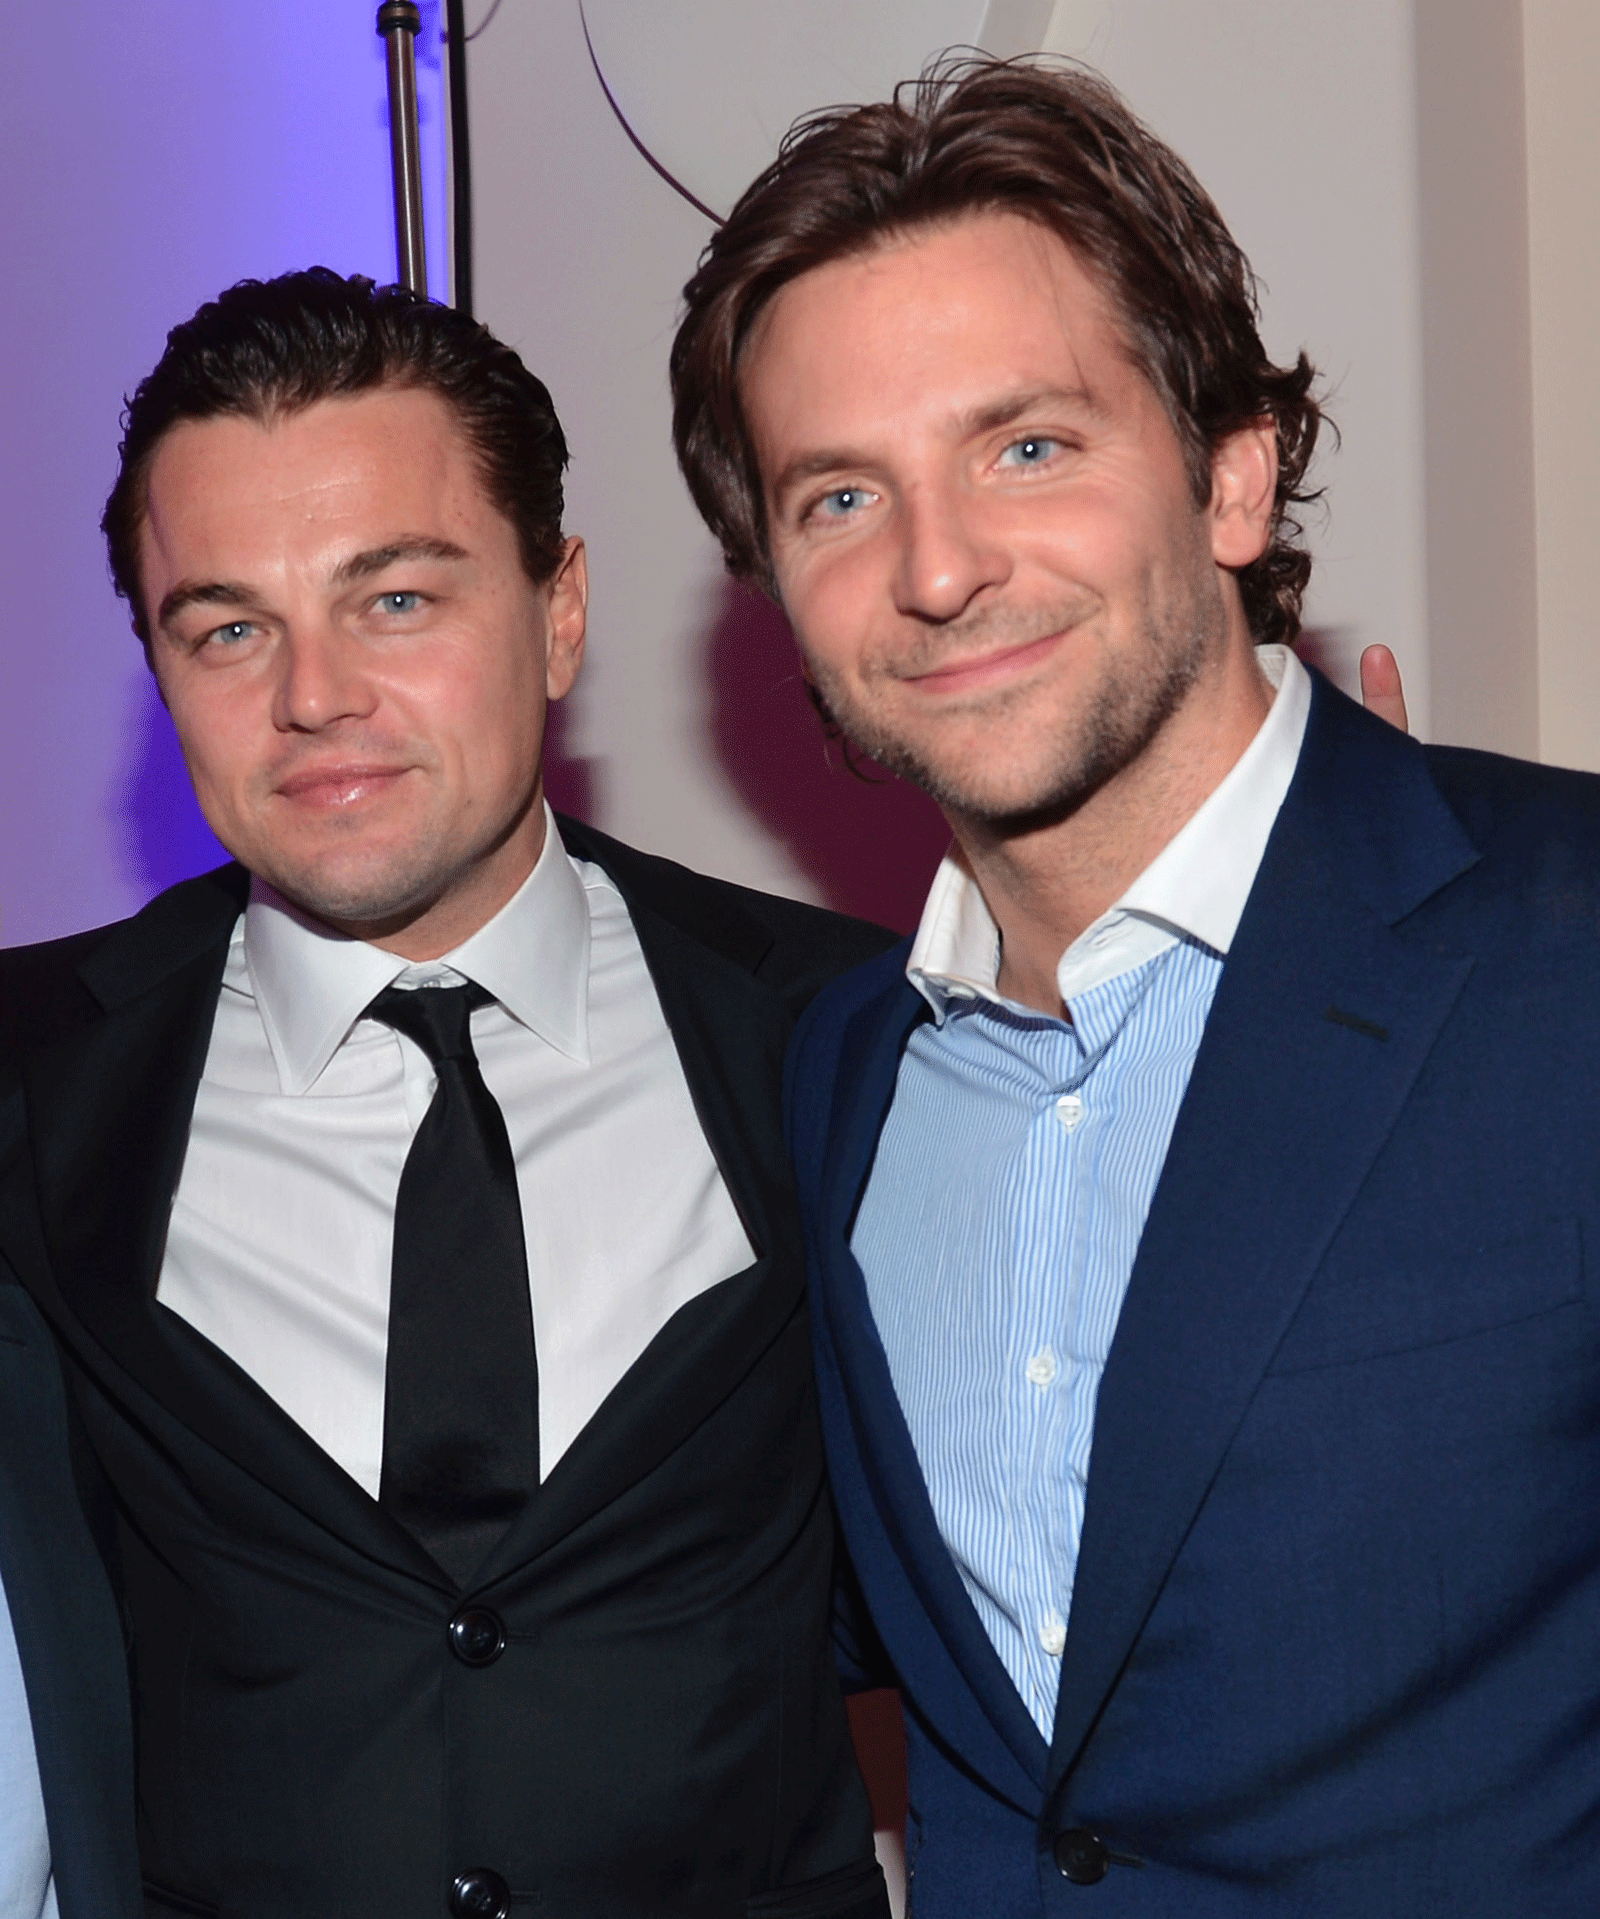 The bromance continues! Bradley Cooper and Leonardo DiCaprio party in New York